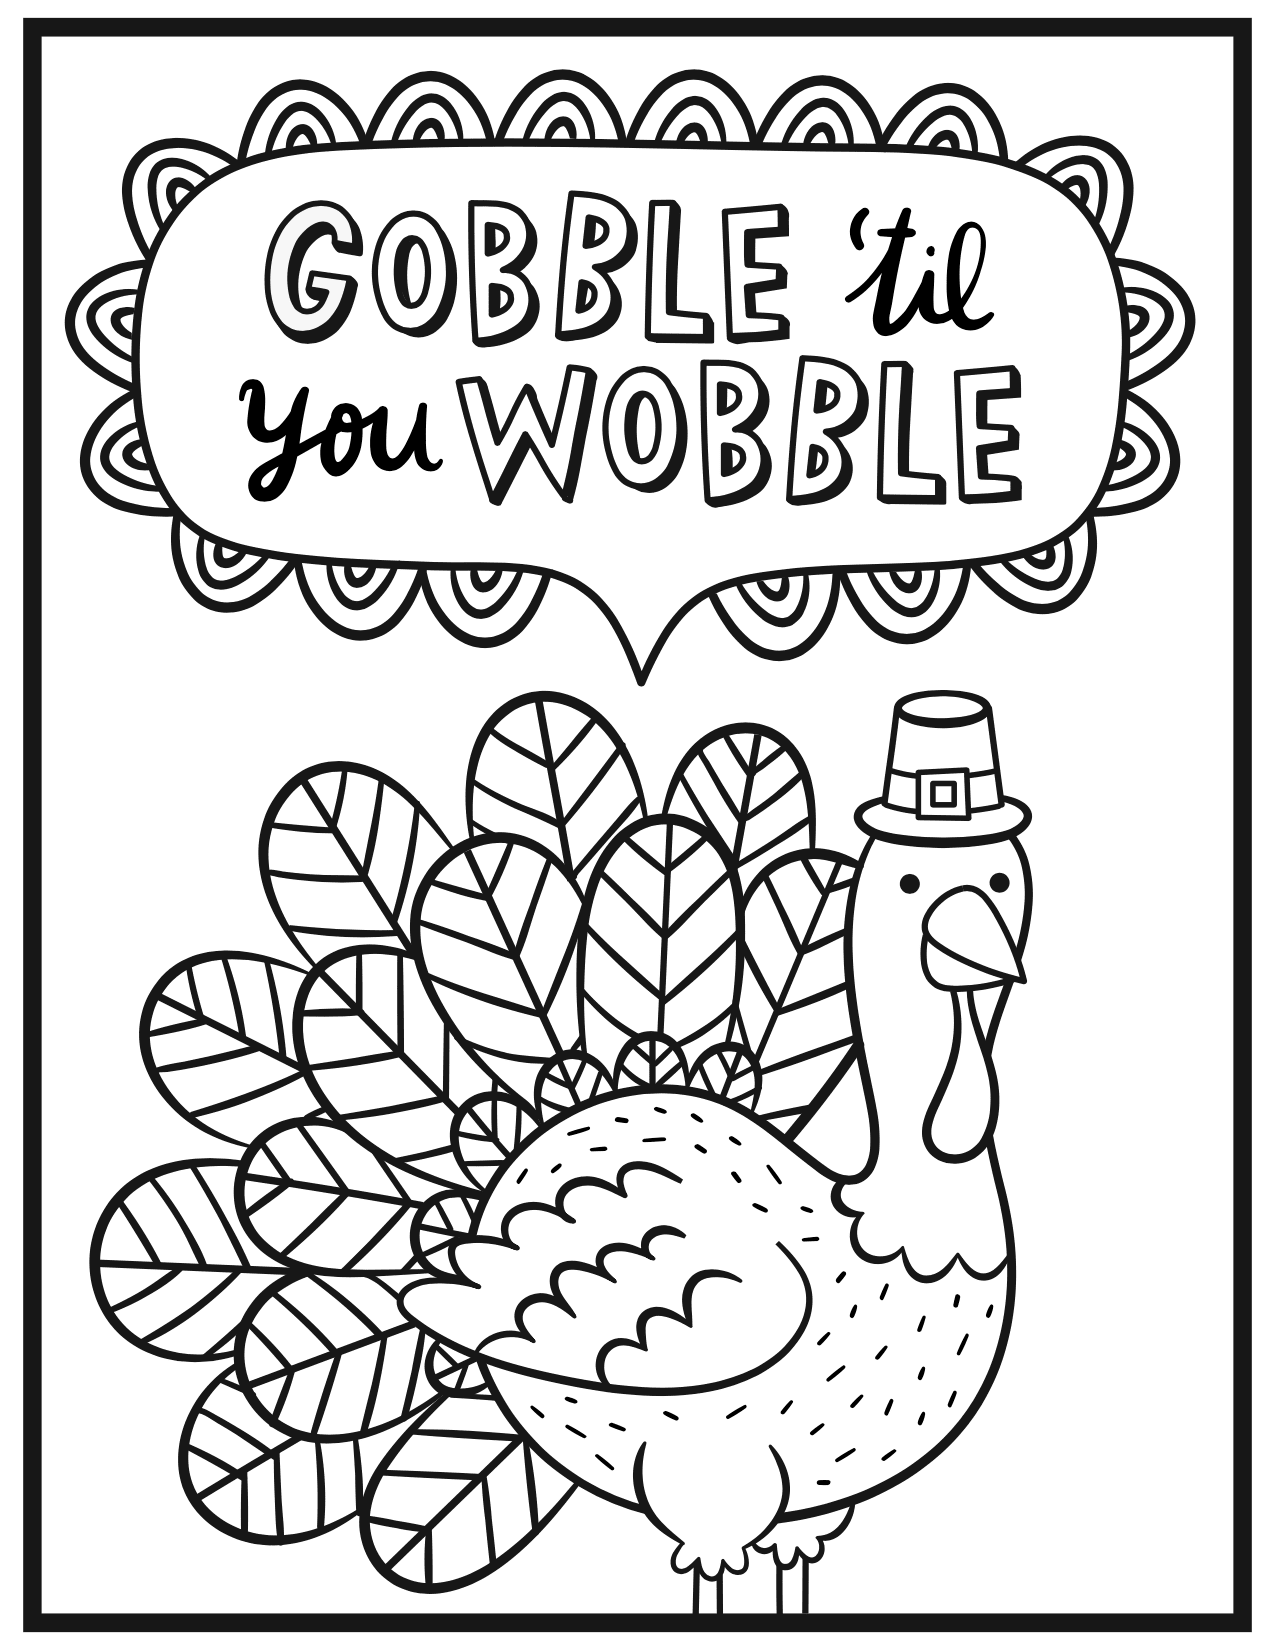 An Adult Coloring Page for Thanksgiving | Kitchn